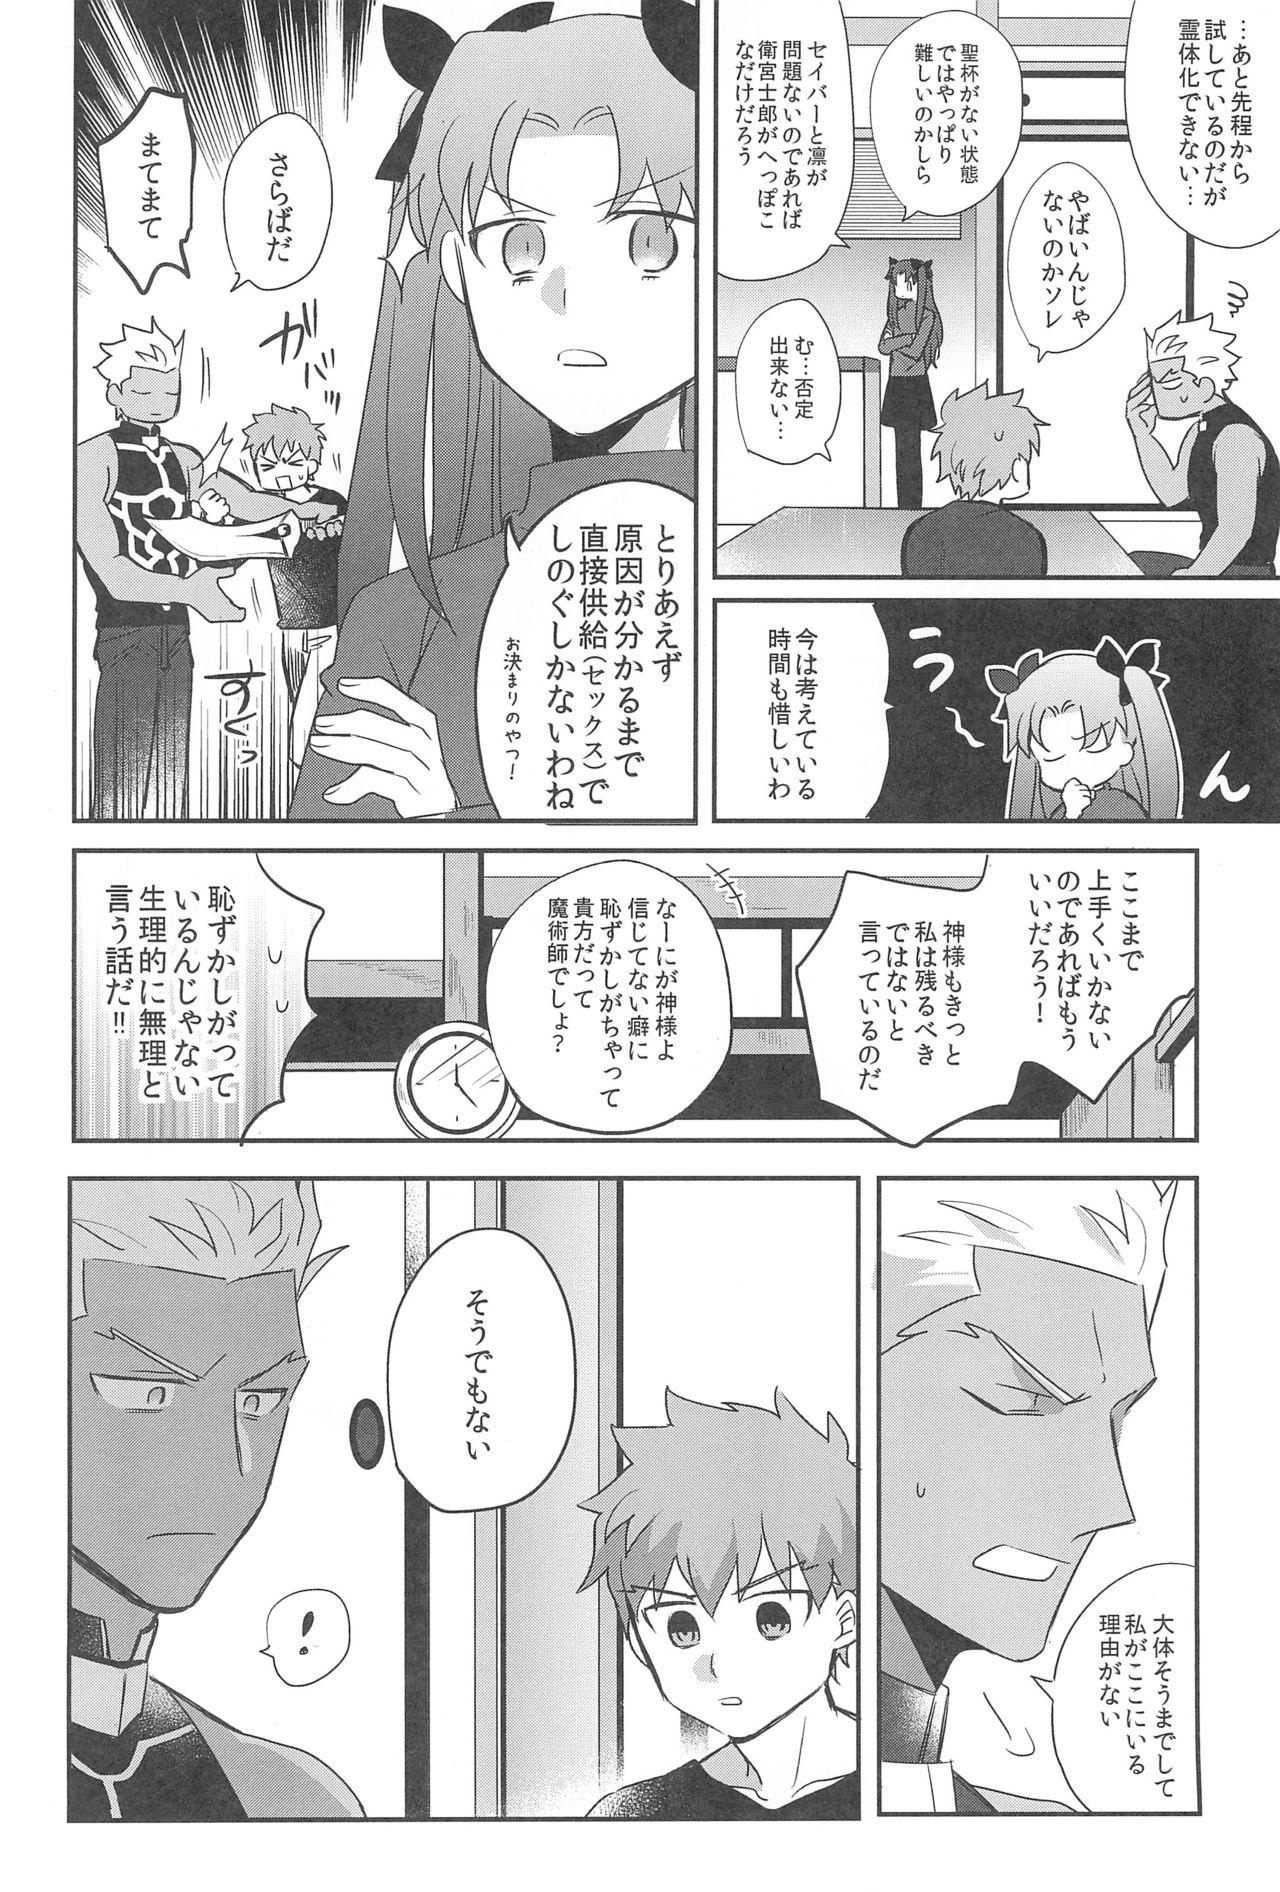 Gostosas Honban NG! - Fate stay night Dyke - Page 6